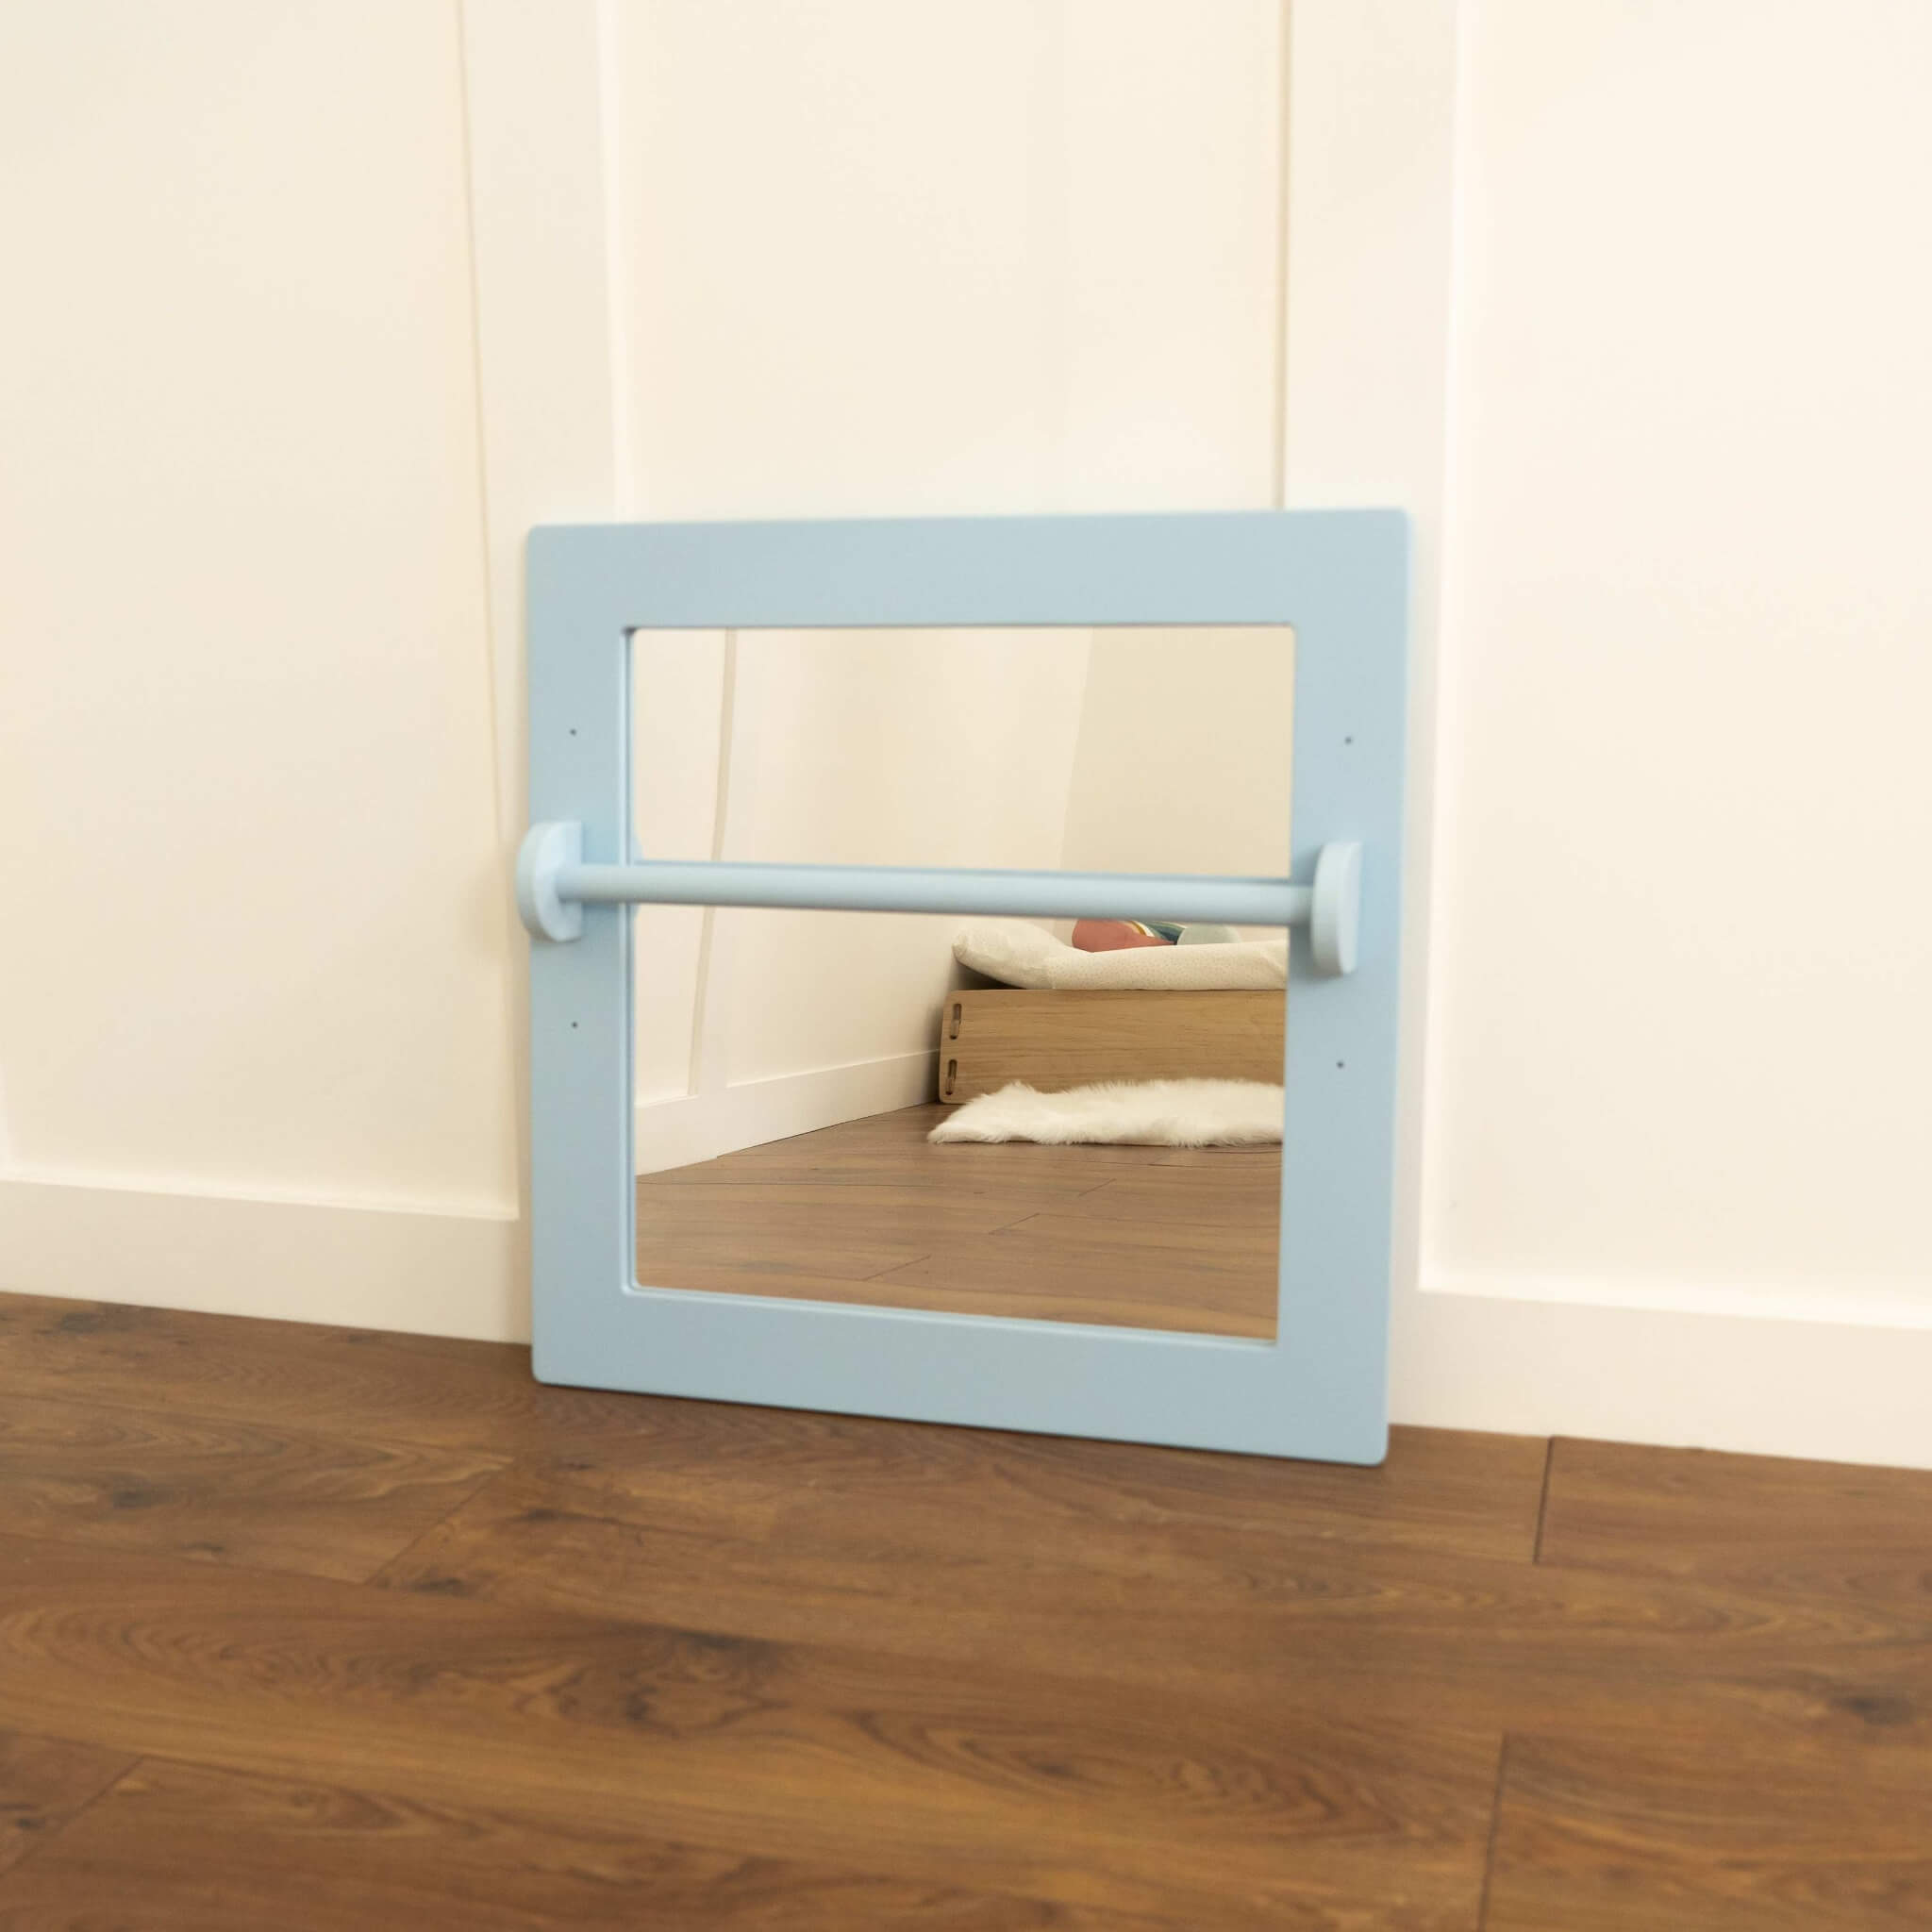 blue baby pull up bar and mirror